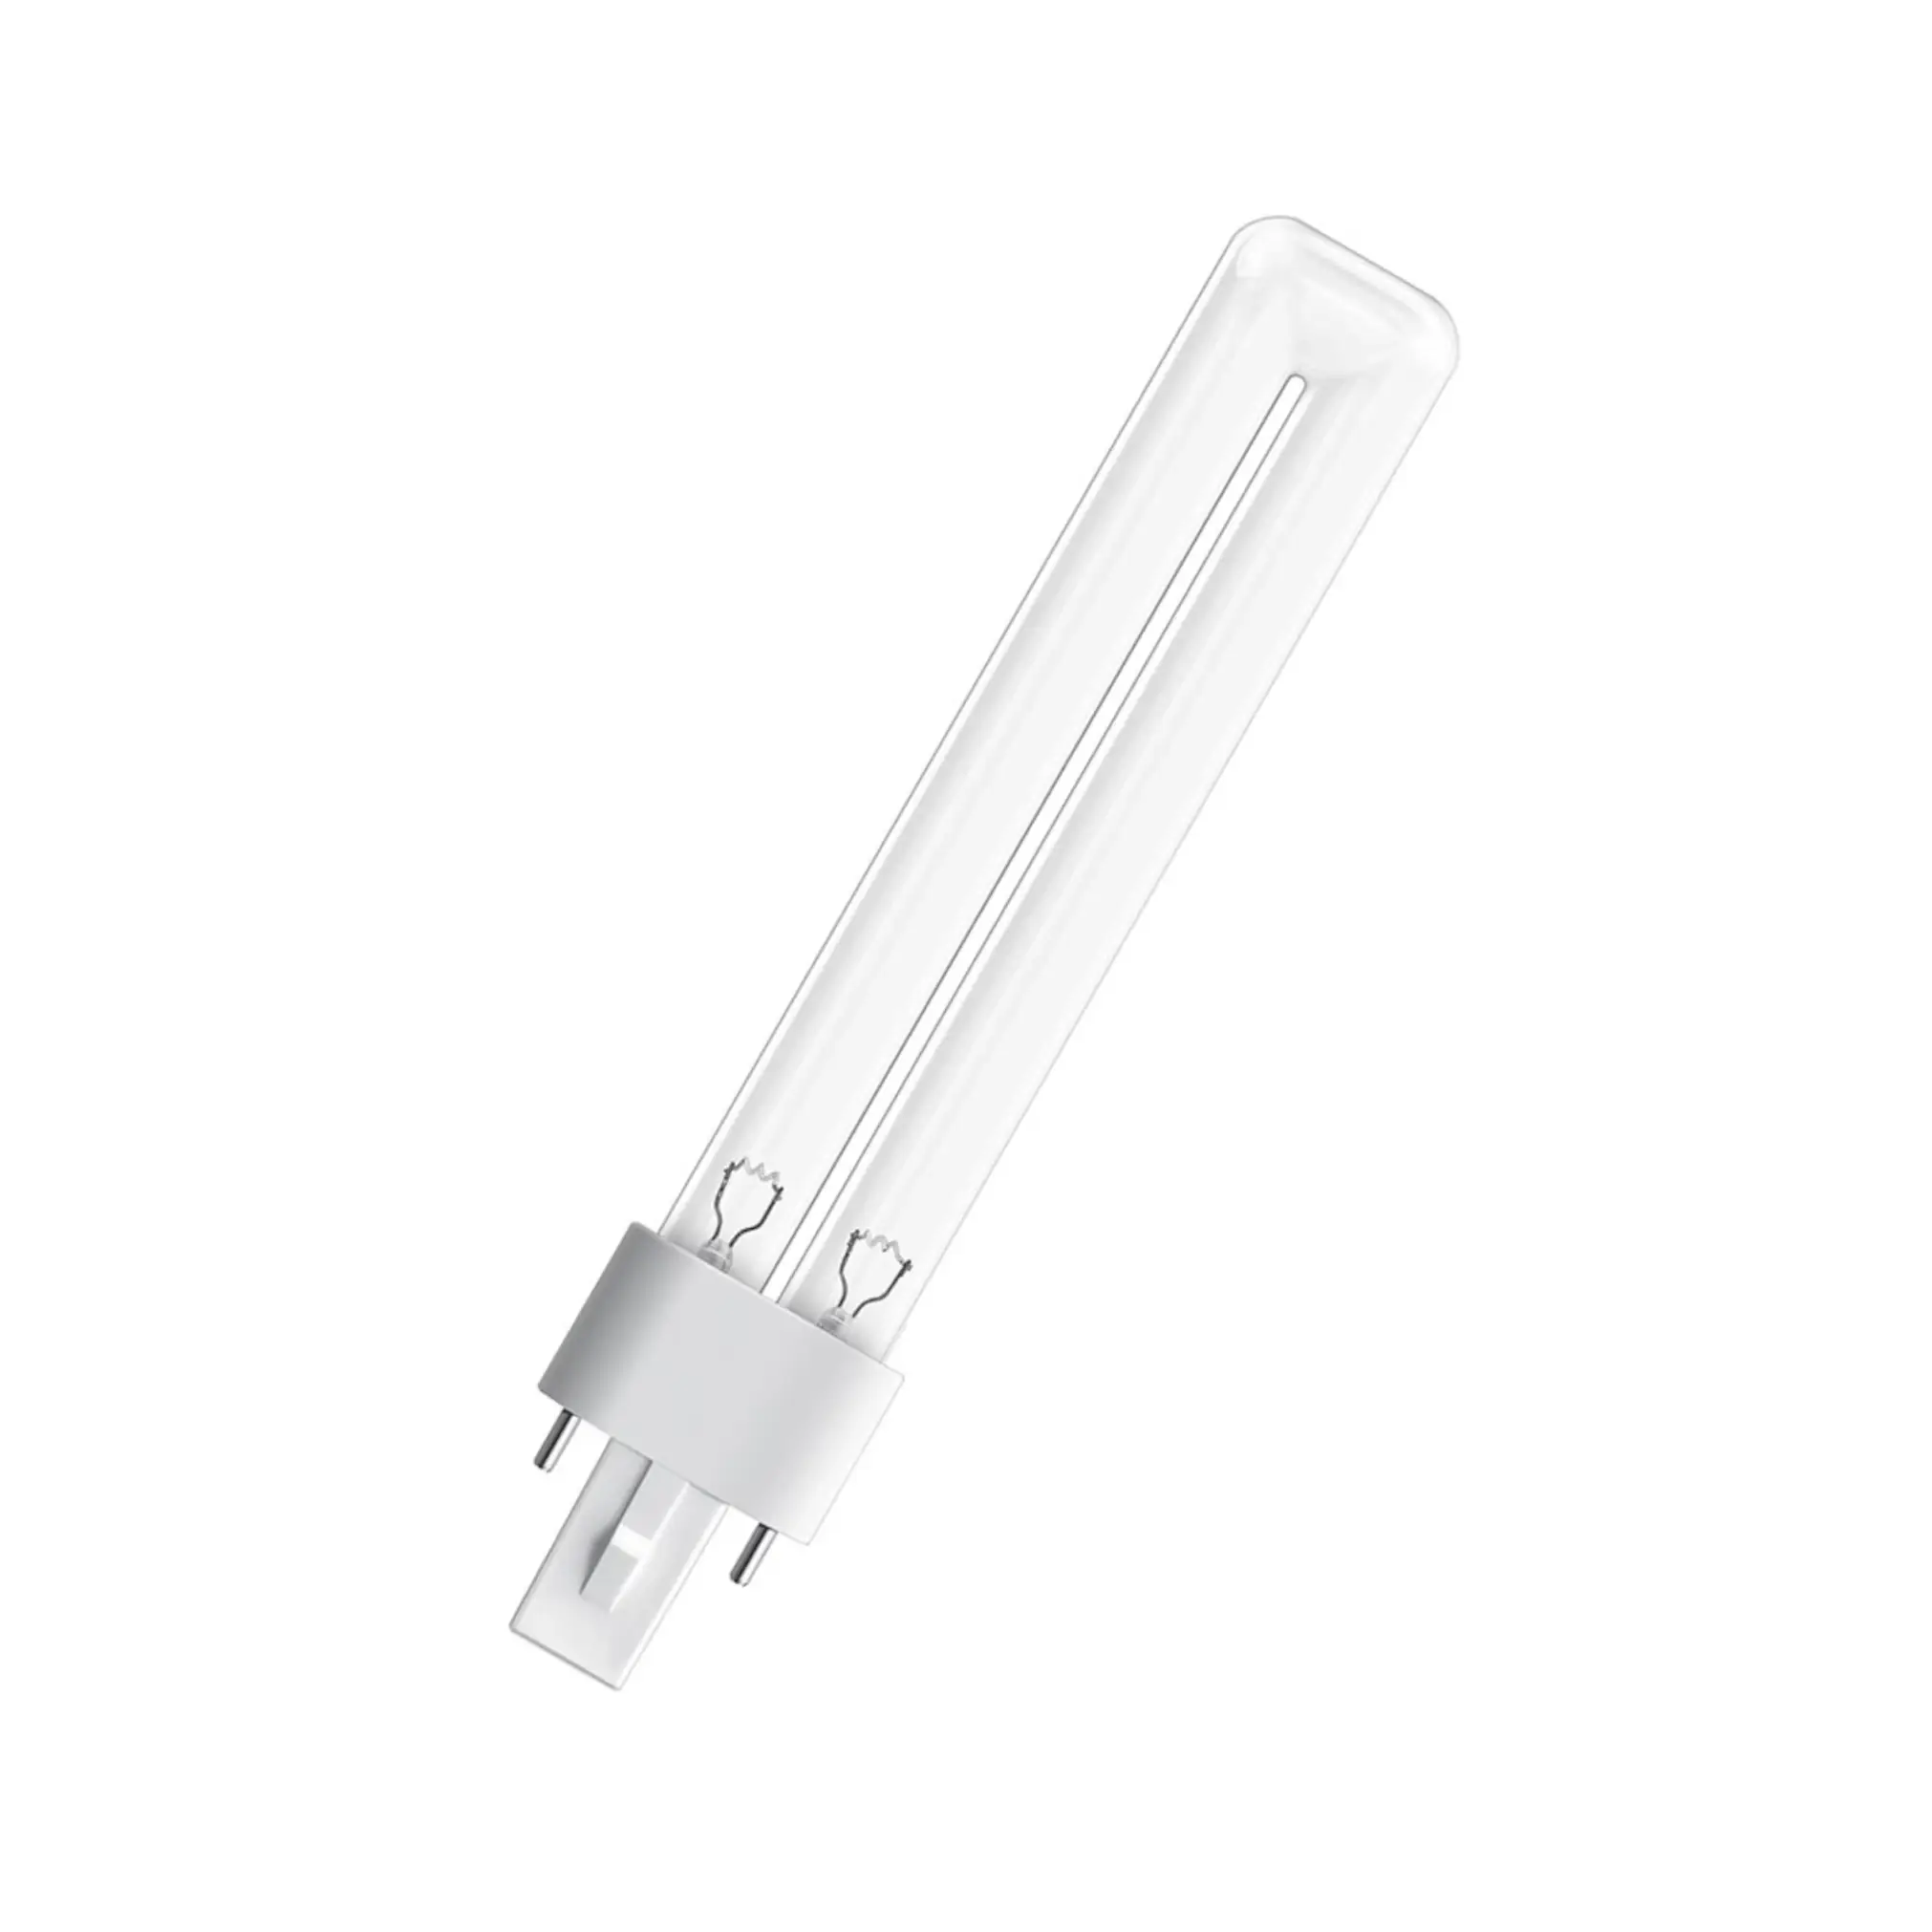 HNS S 5W G23Disinfection Lamps